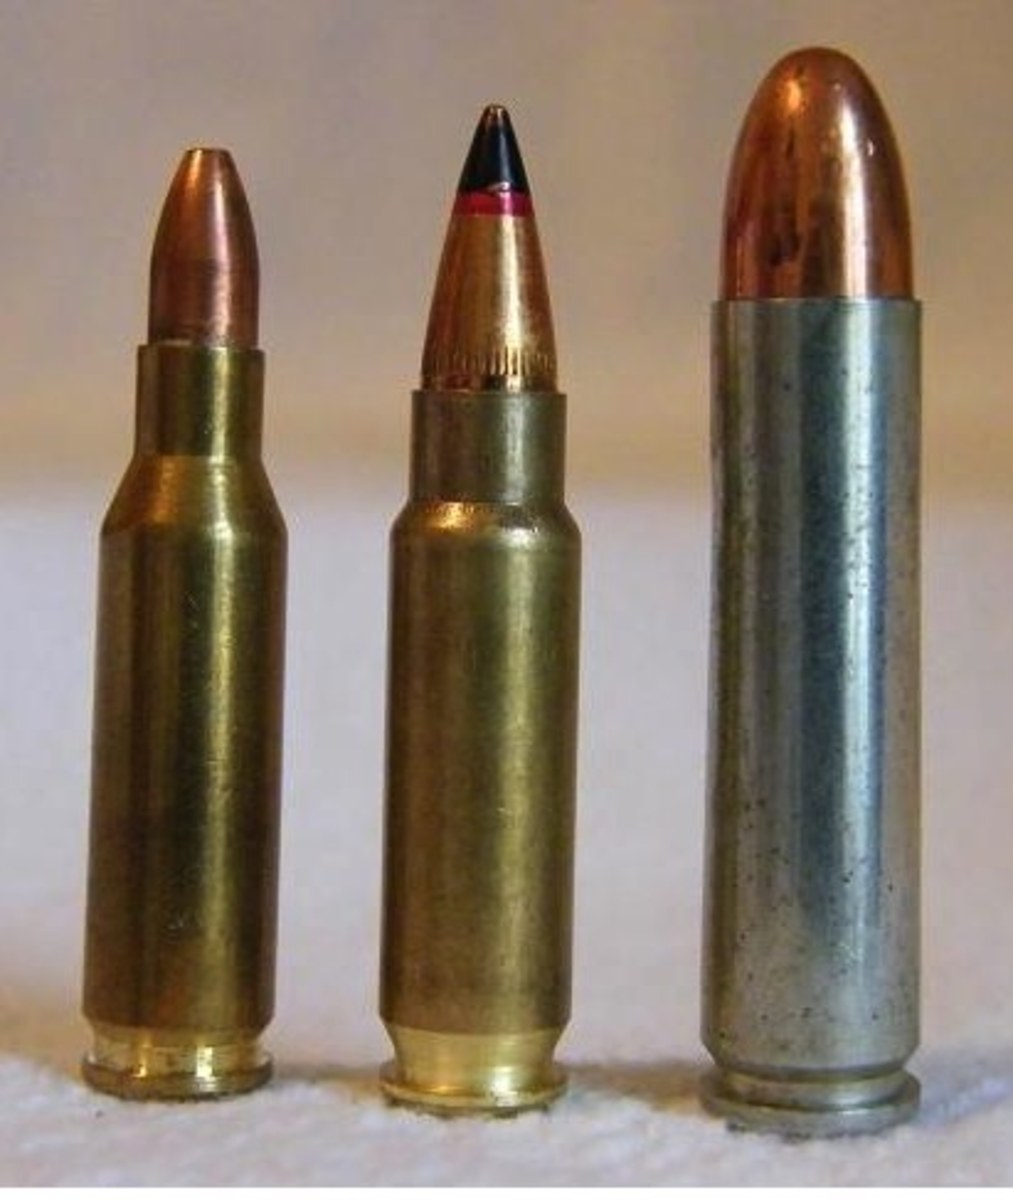 4.6 hollow point, 5.7 steel tip and .30 carbine